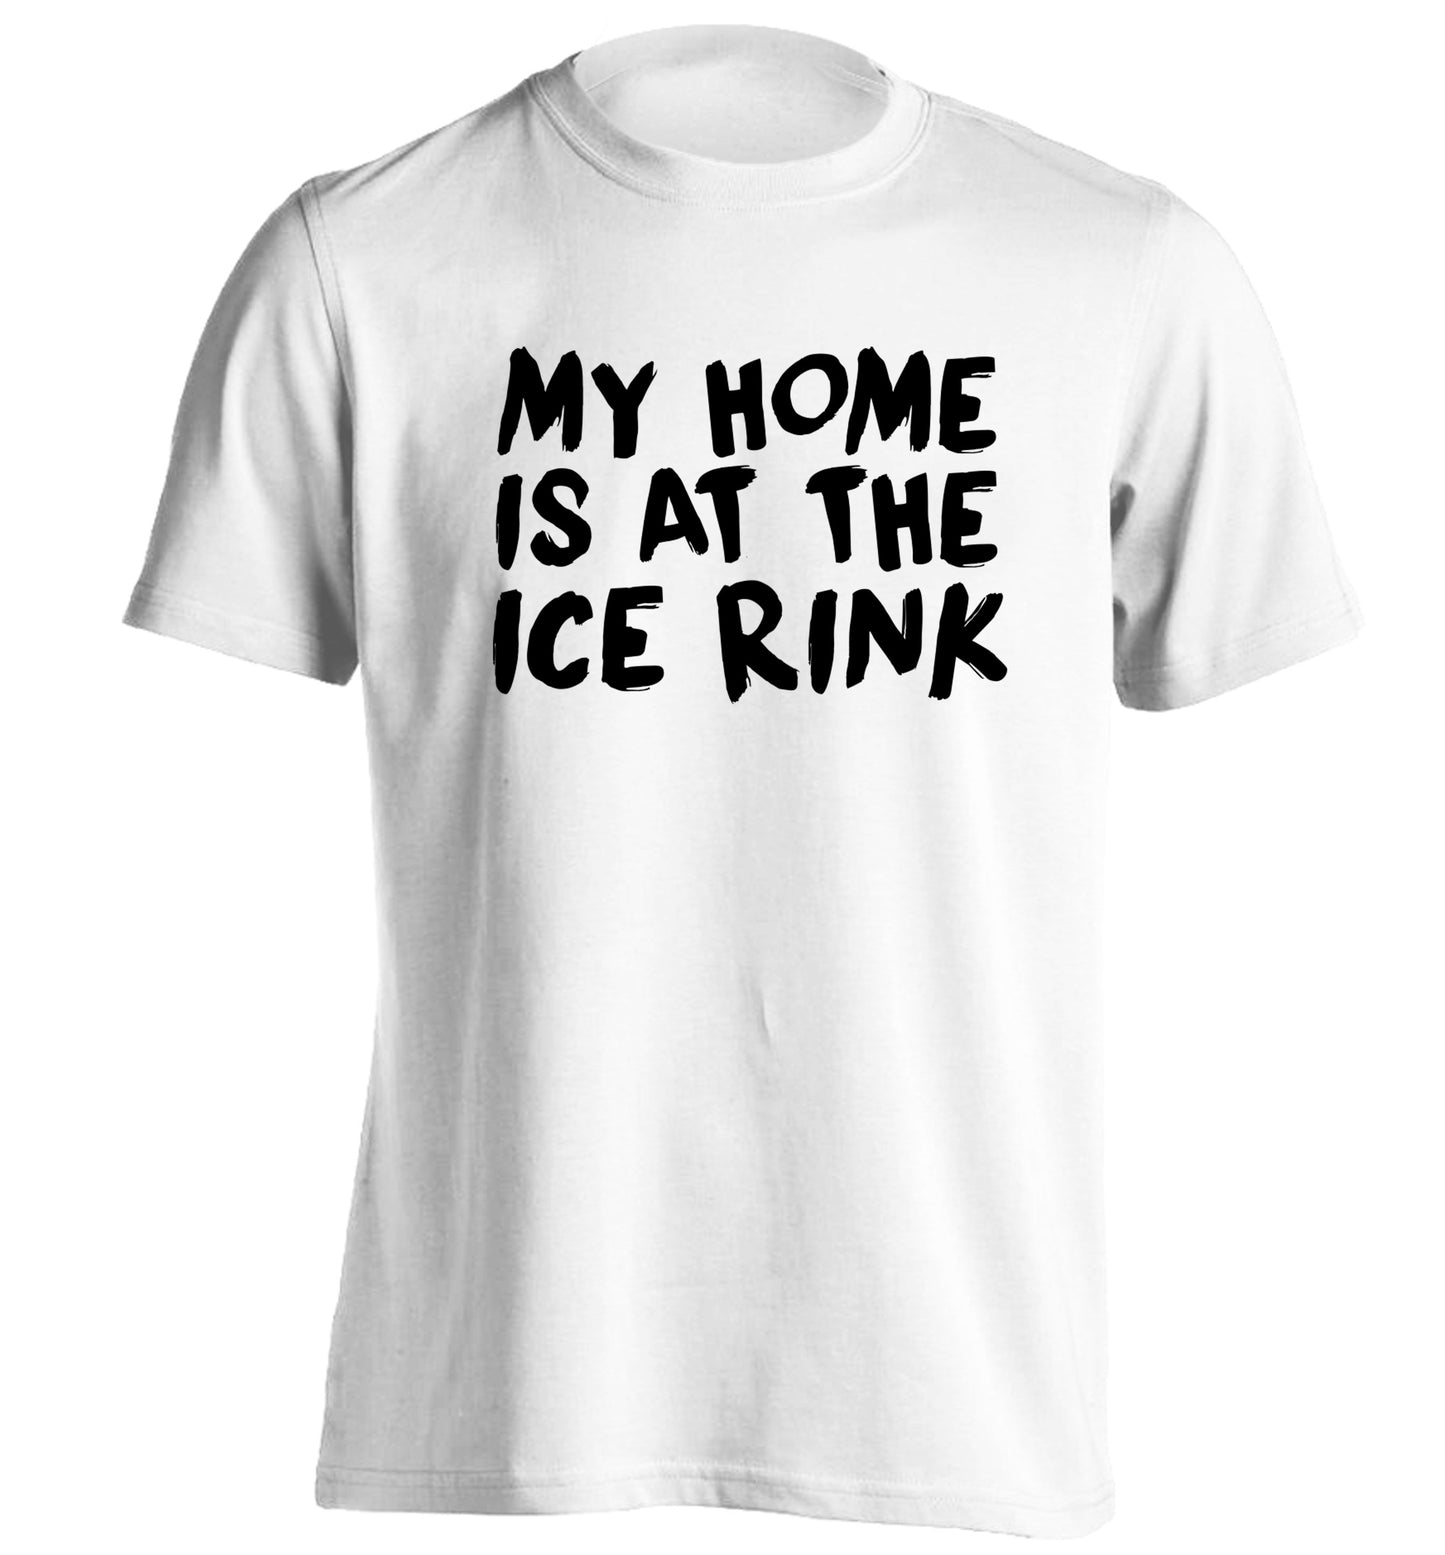 My home is at the ice rink adults unisex white Tshirt 2XL